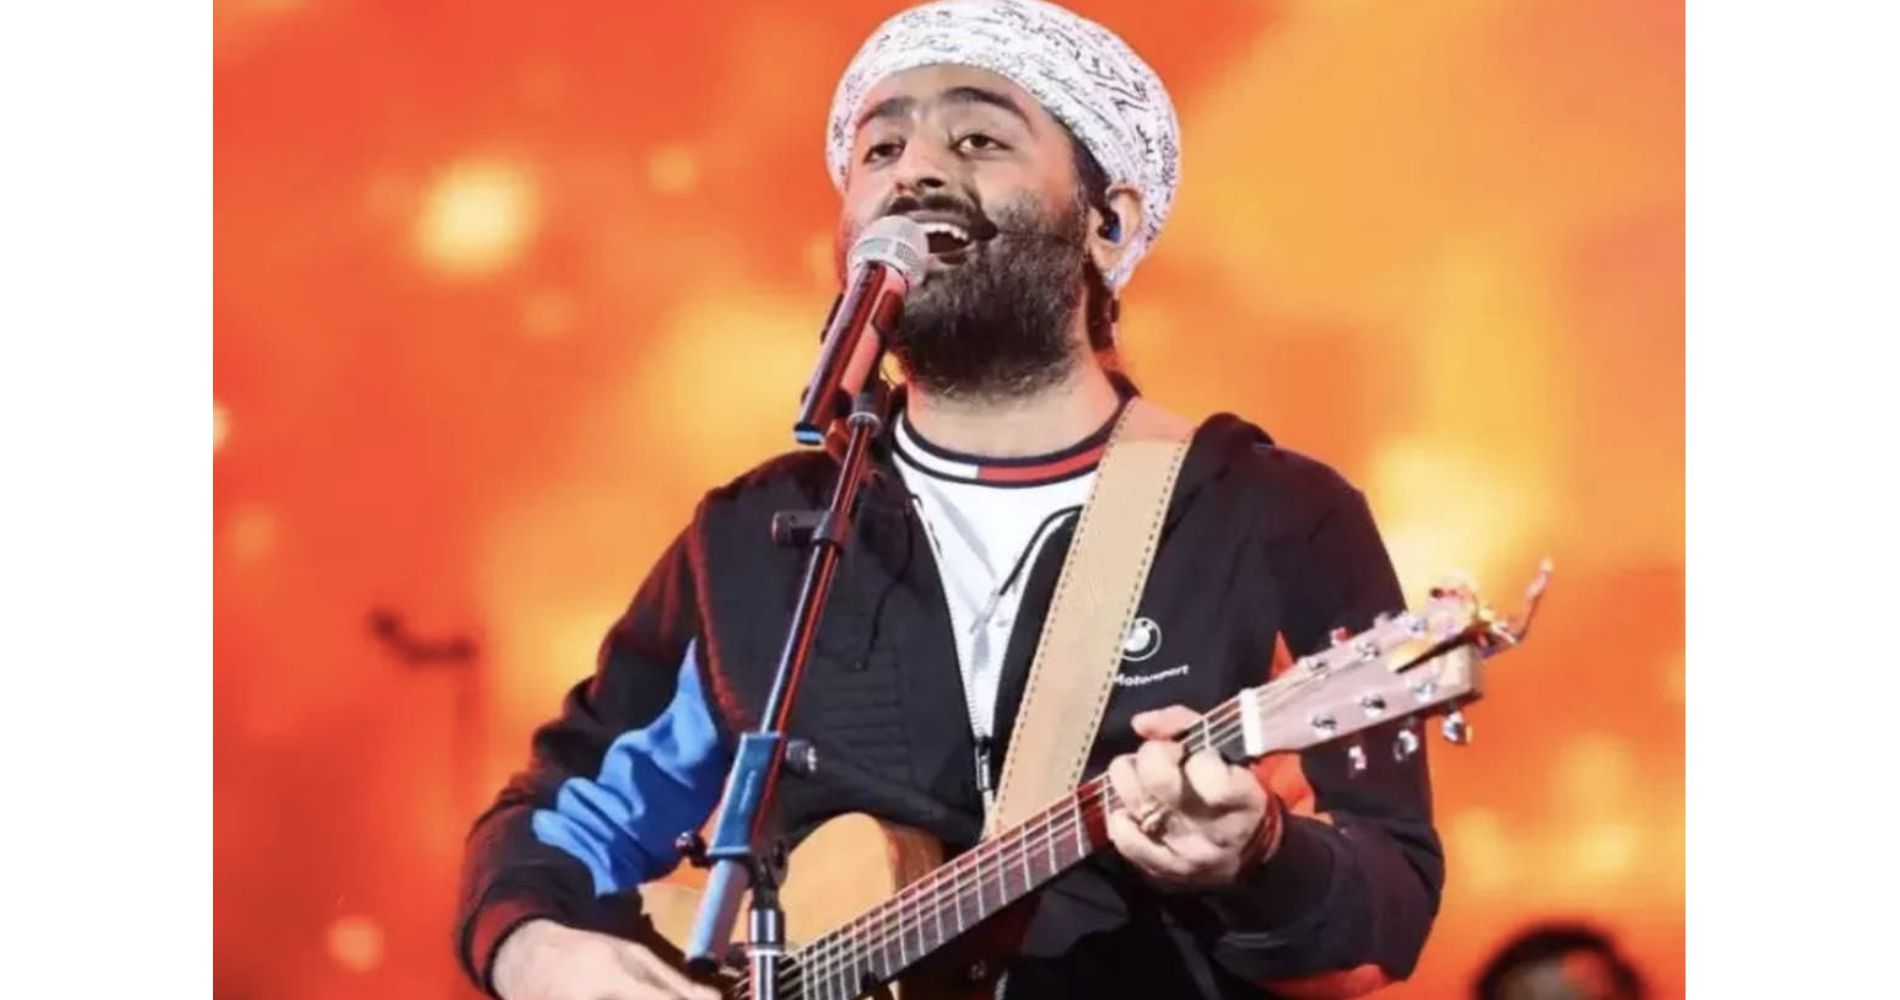 Save The Date: Arijit Singh's Magical Concert In Patna On December 10th